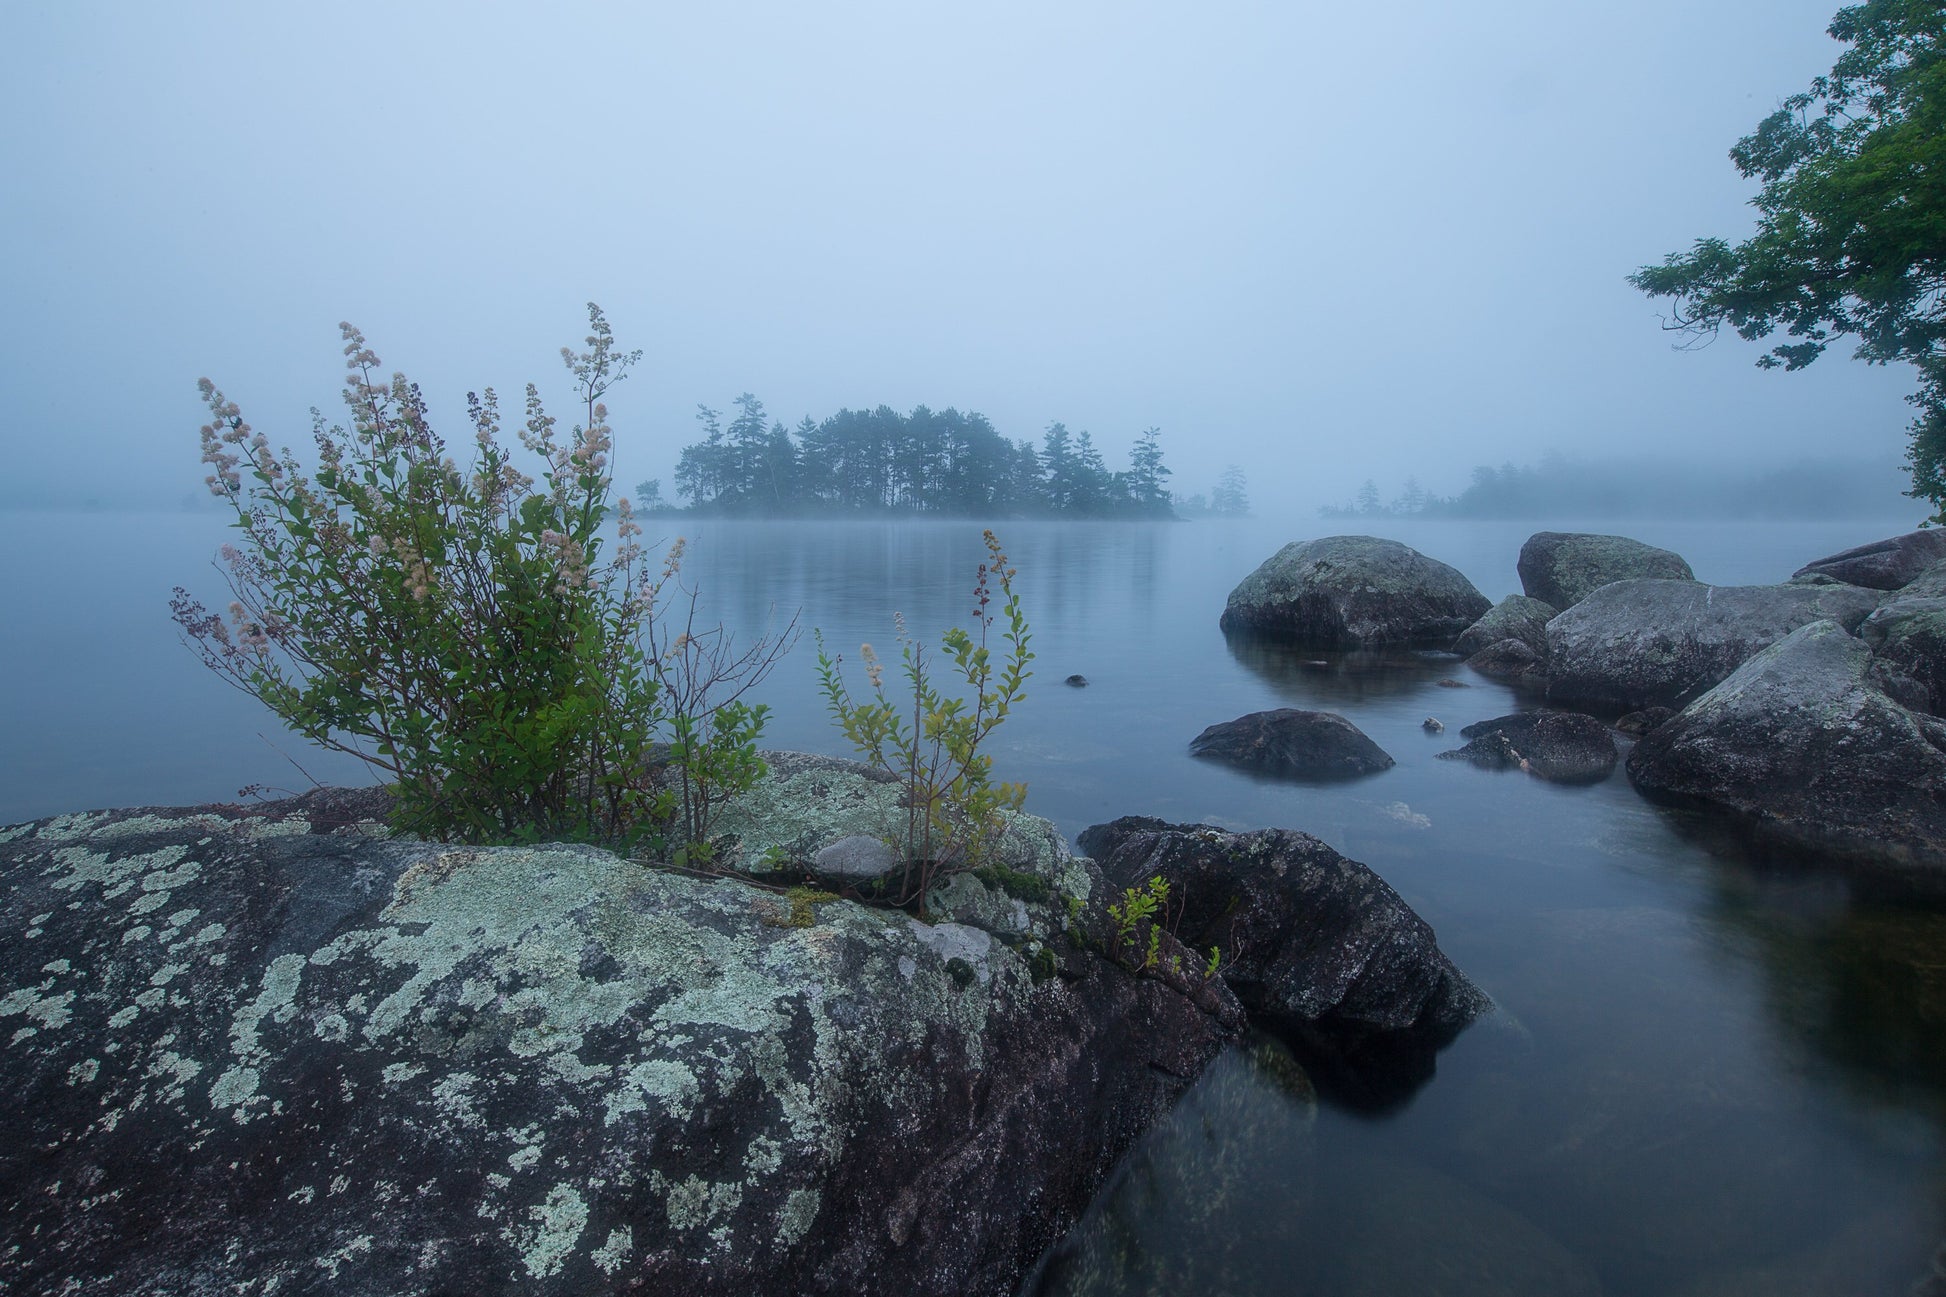 morning mist over calm waters on Squam Lake